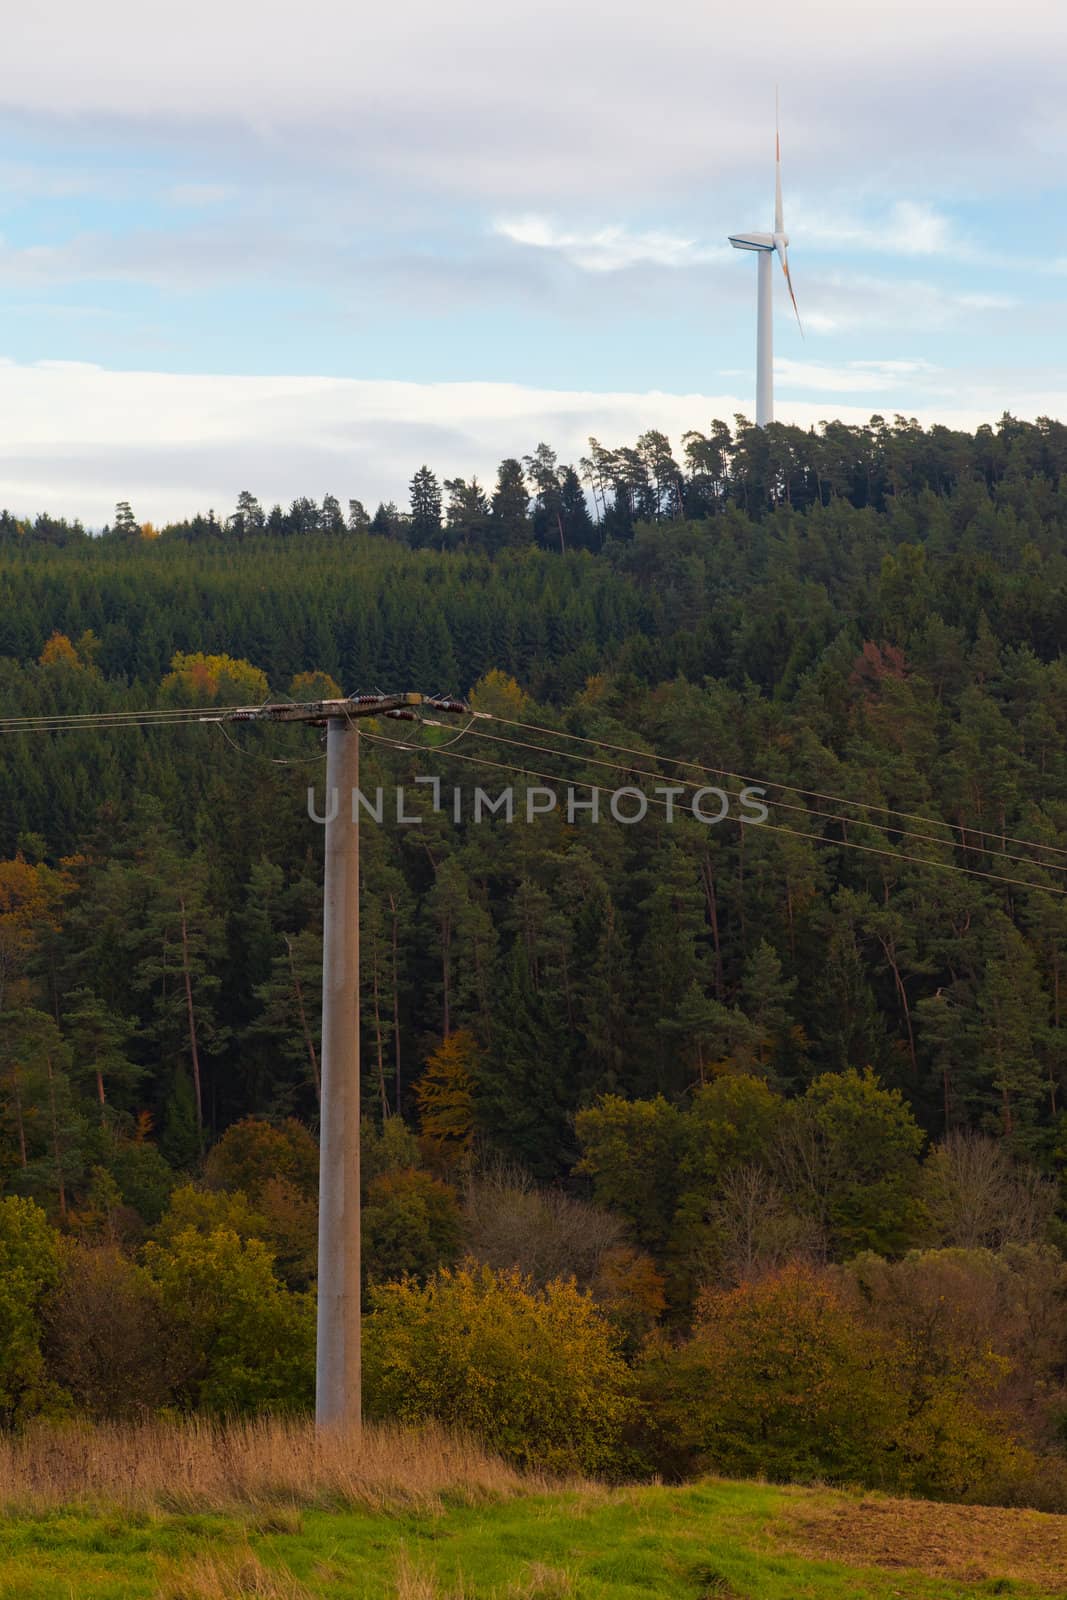 Large wind turbine on the horizon rising high above forest tree tops with high-voltage transmission line in foreground.